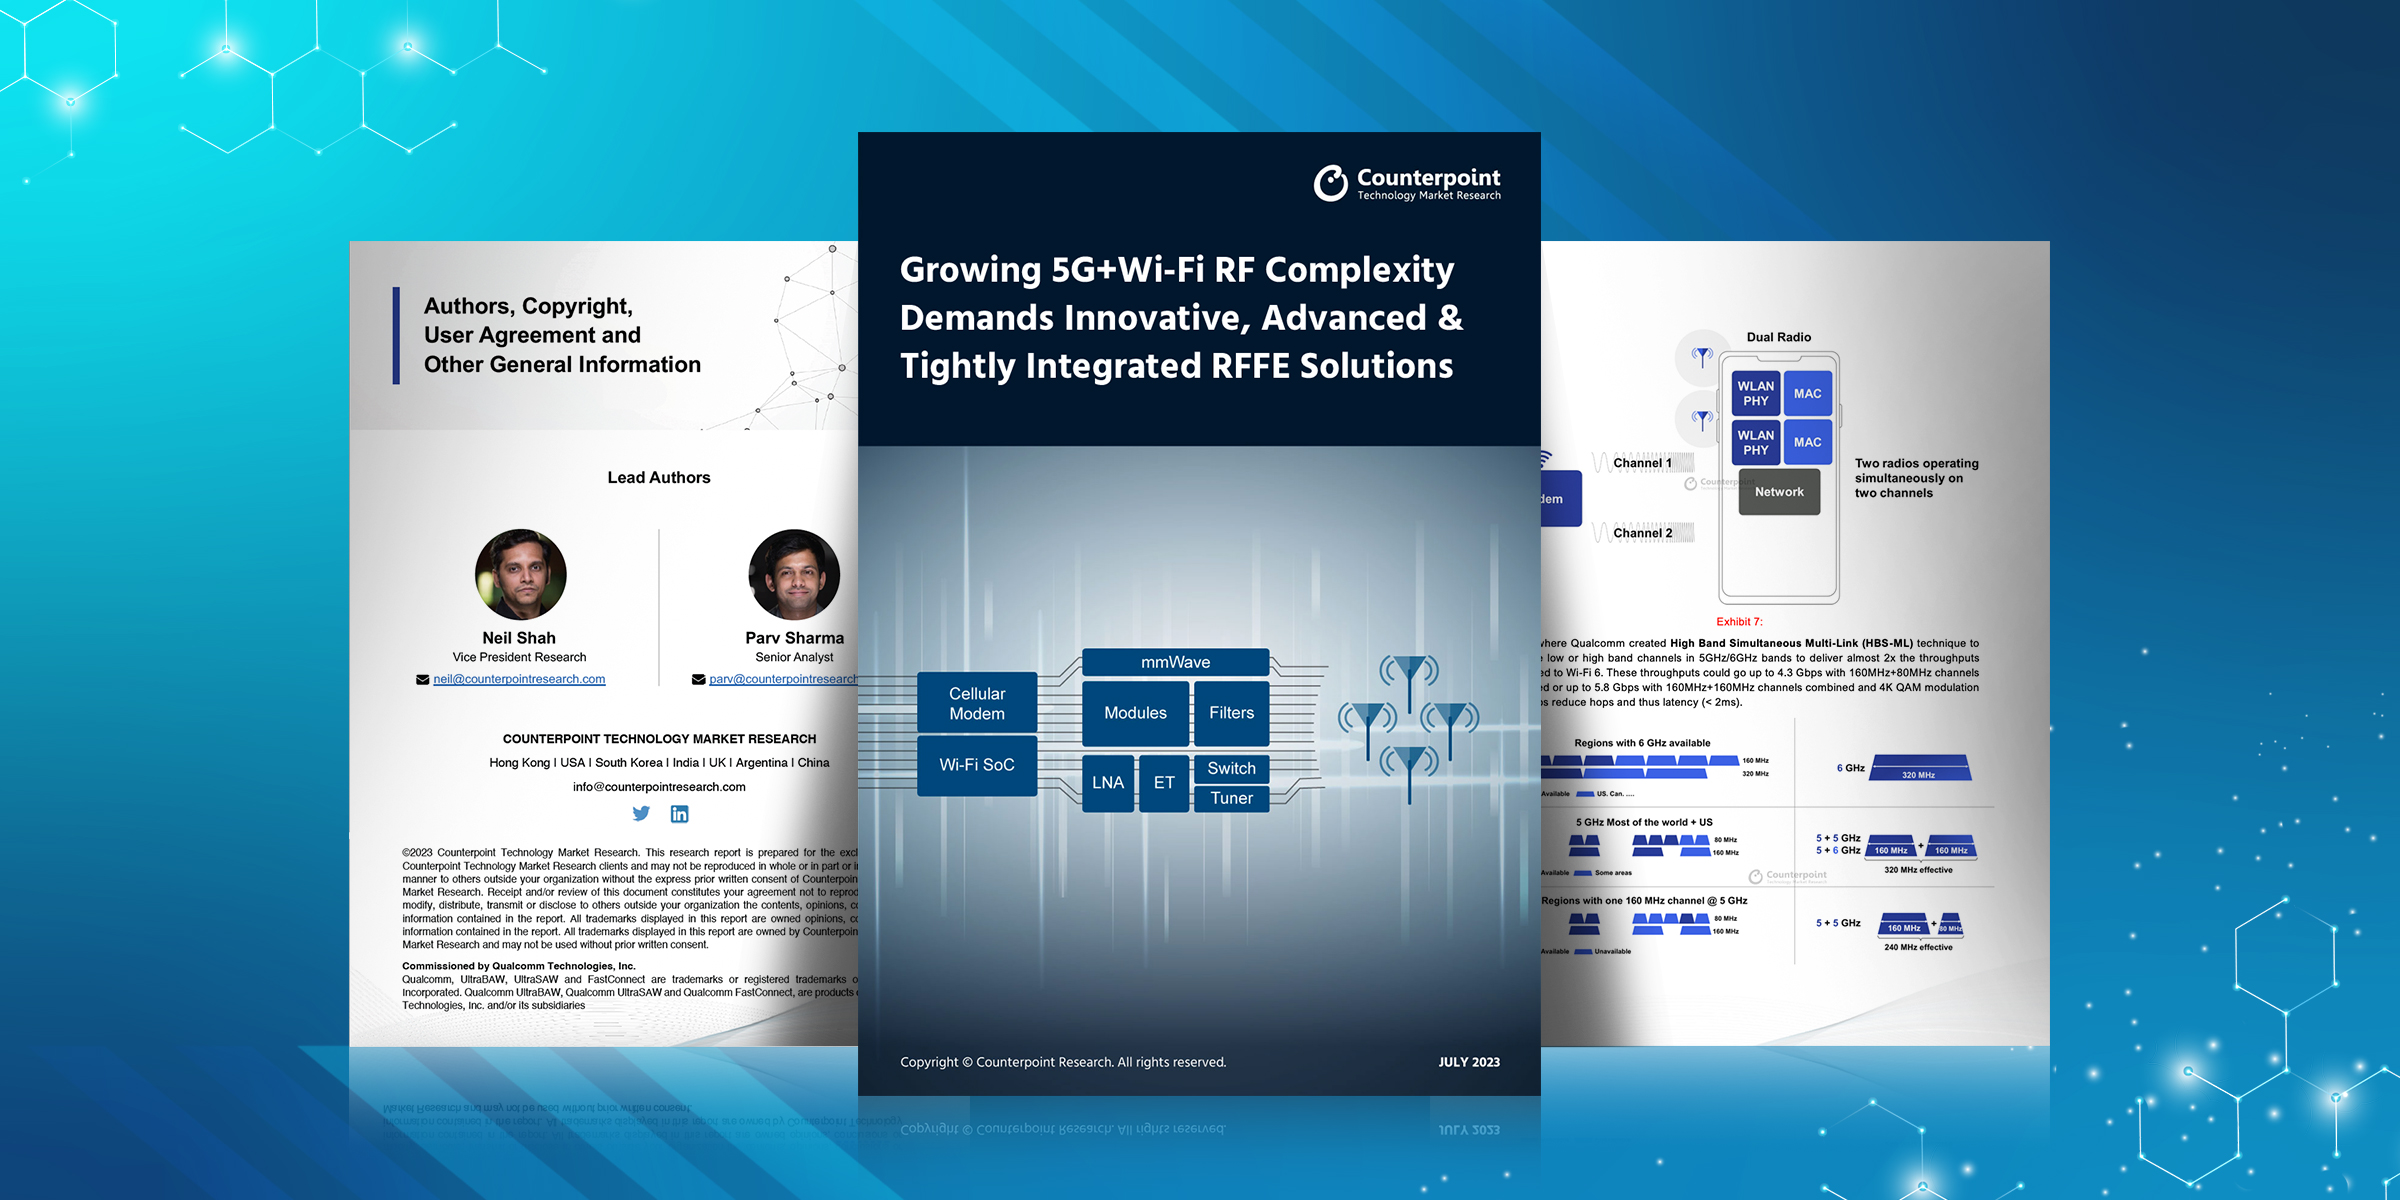 White Paper: Growing 5G+Wi-Fi RF Complexity Demands Innovative, Advanced & Tightly Integrated RFFE Solutions